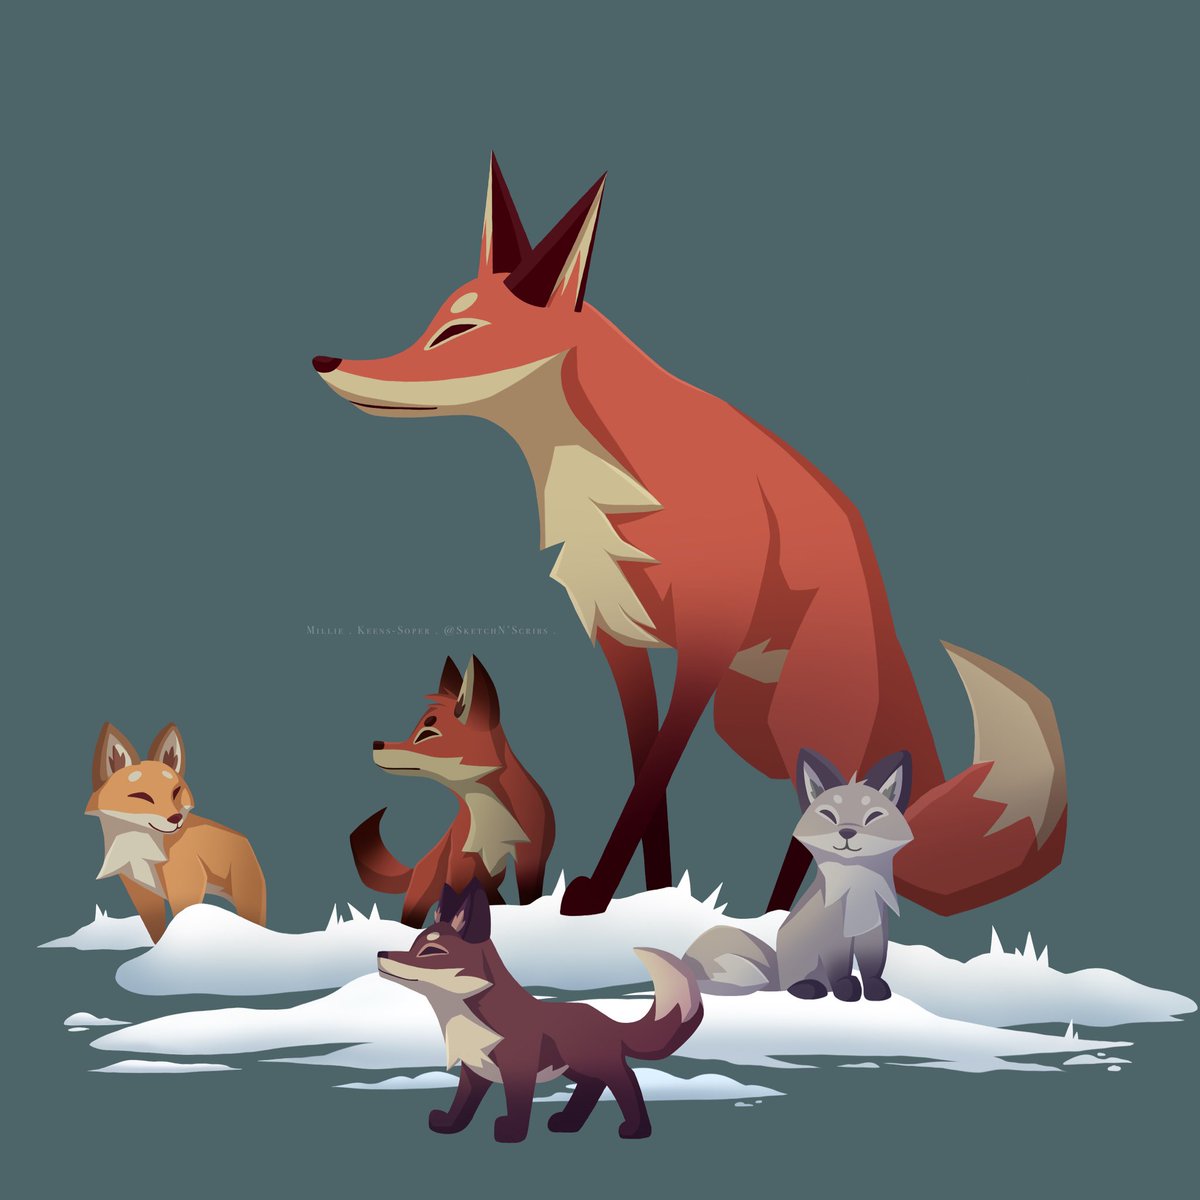 A Mother of Four 🦊 #endling #extinctionisforever

Support Indie Devs and their projects > @HerobeatStudios